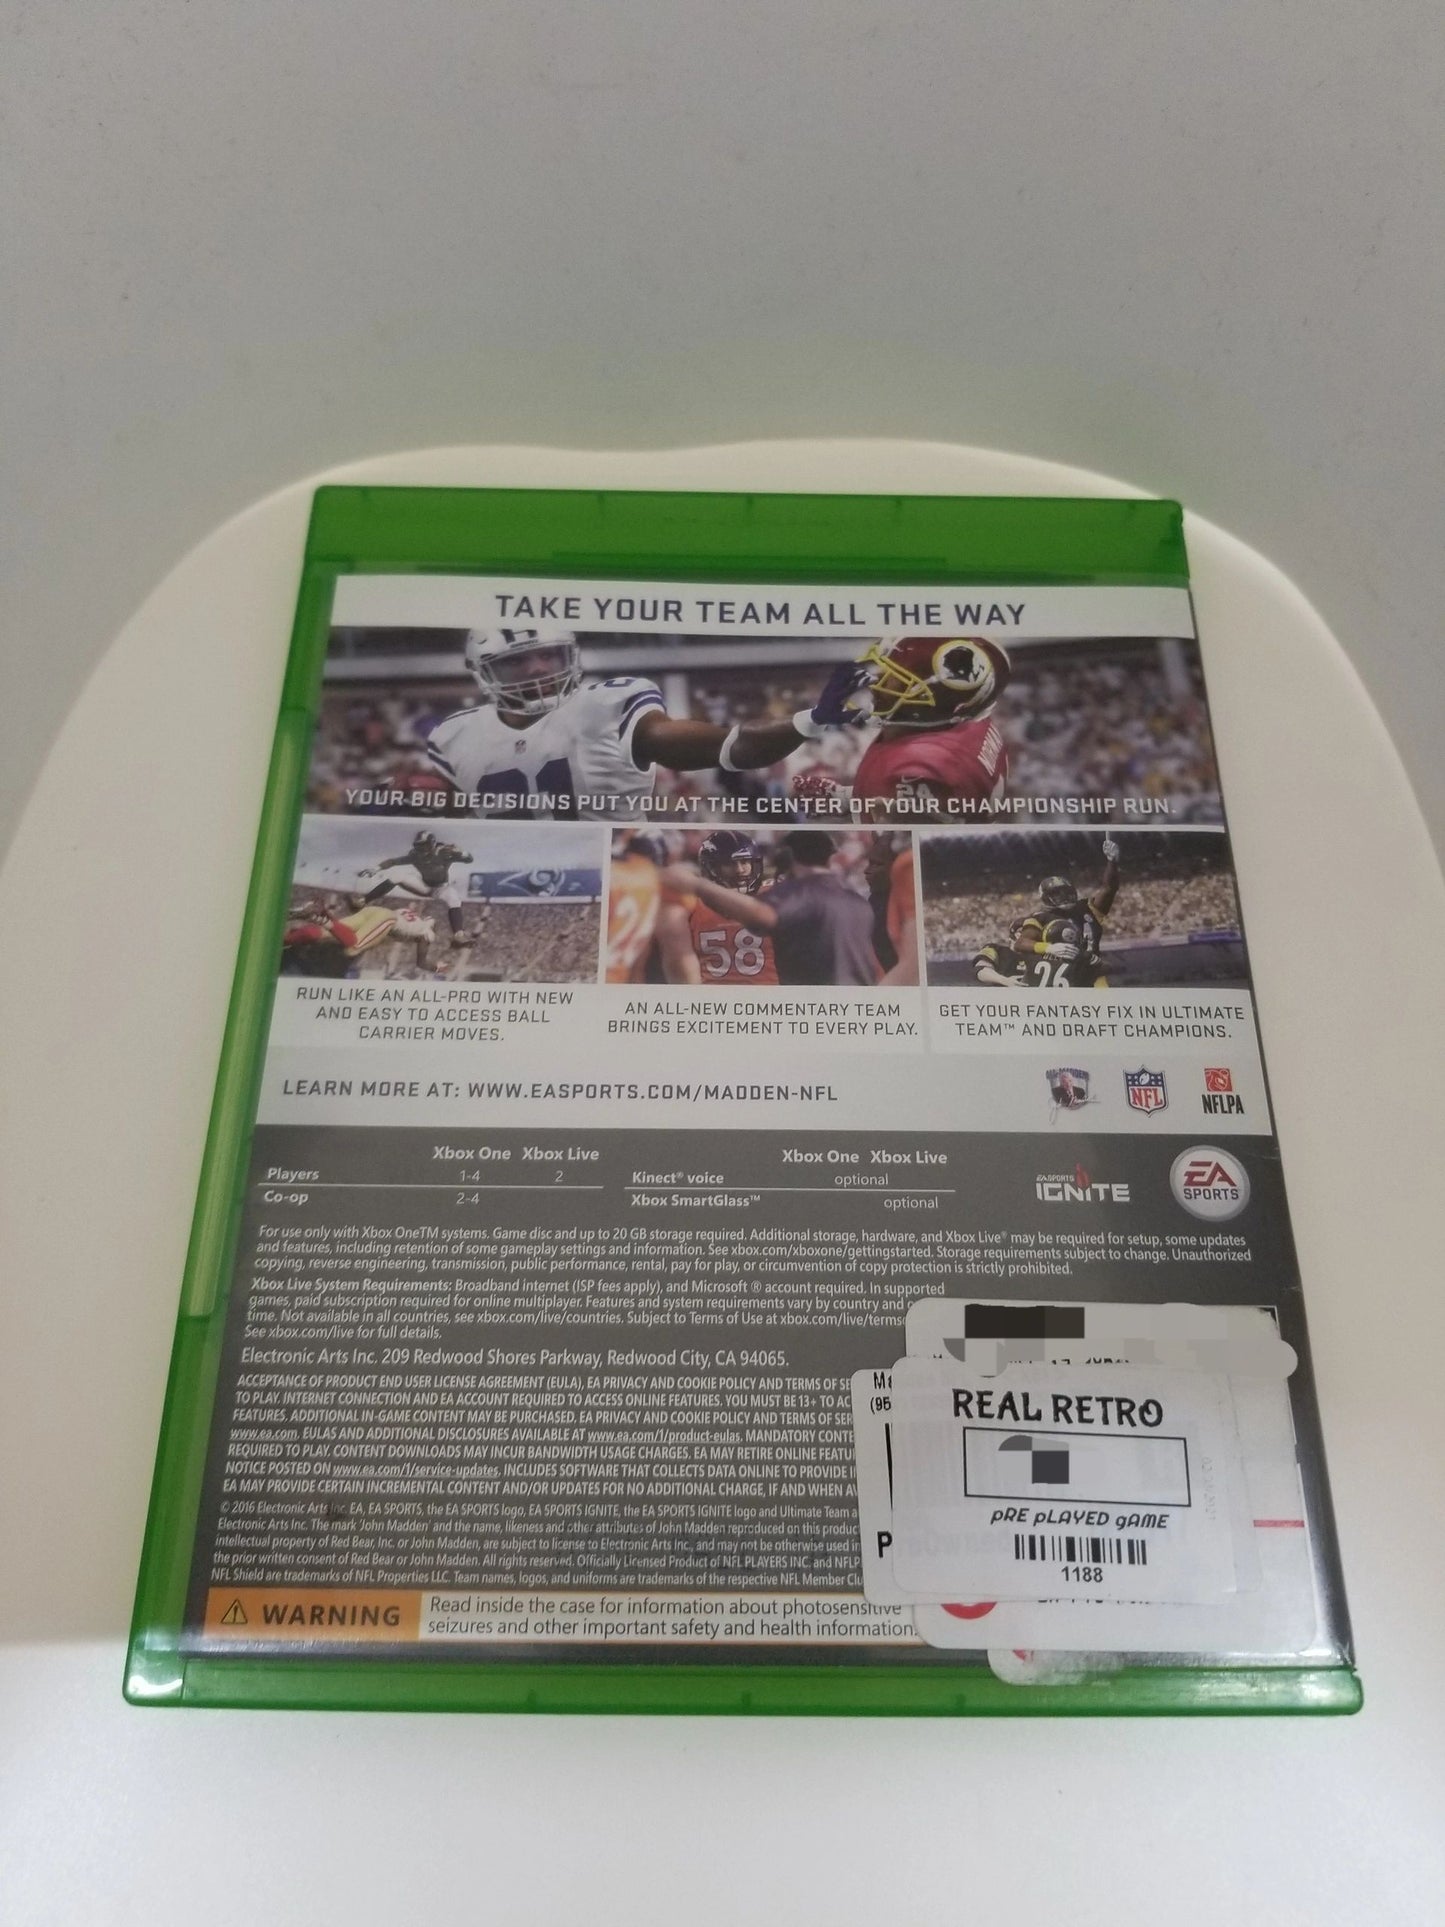 Preowned Madden 17 (XBONE)